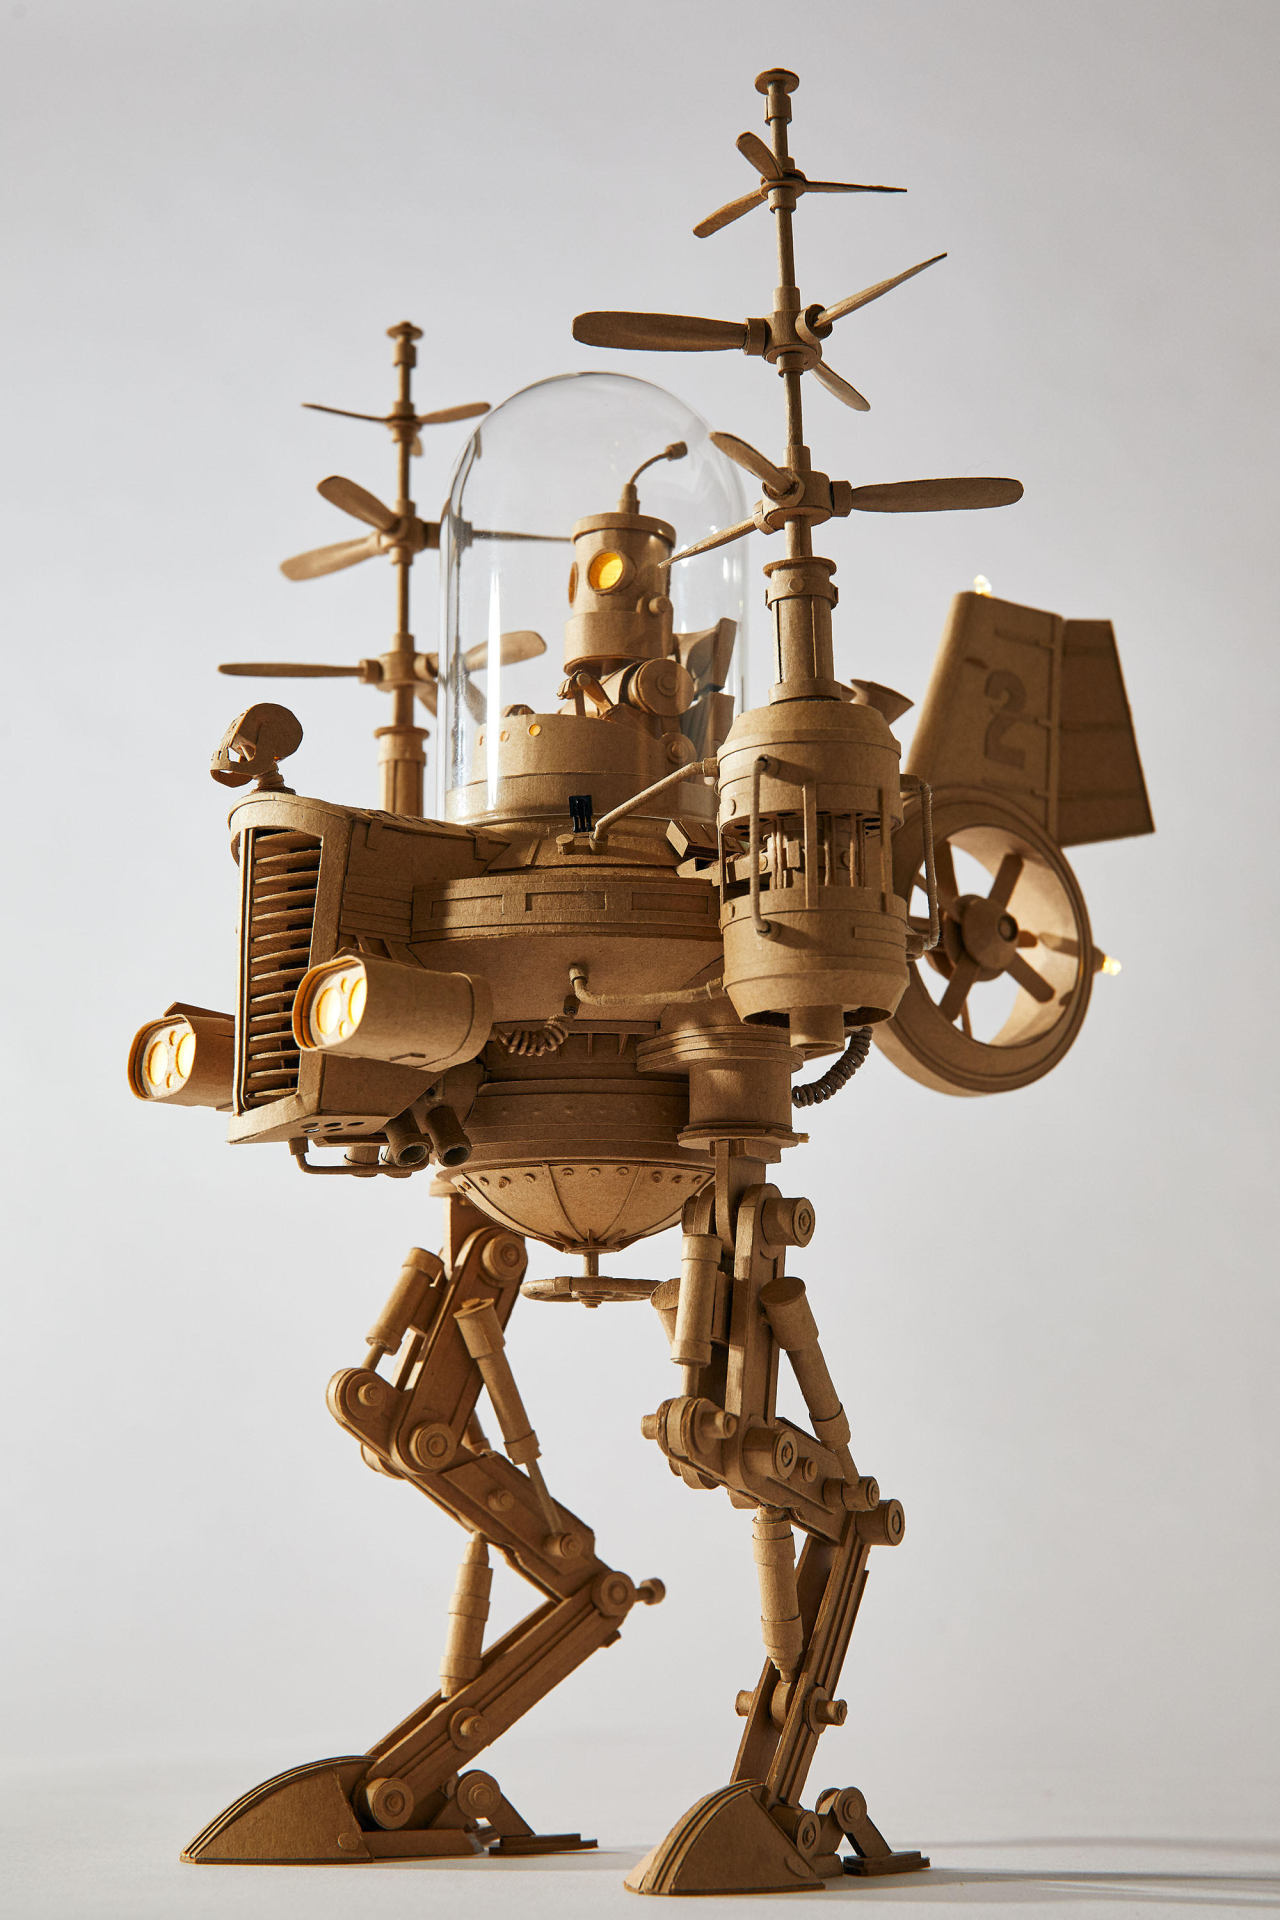 itscolossal:
“Sci-Fi Inspired Cardboard Sculptures by Greg Olijnyk Feature Fully Articulated Limbs and Working Motors
”